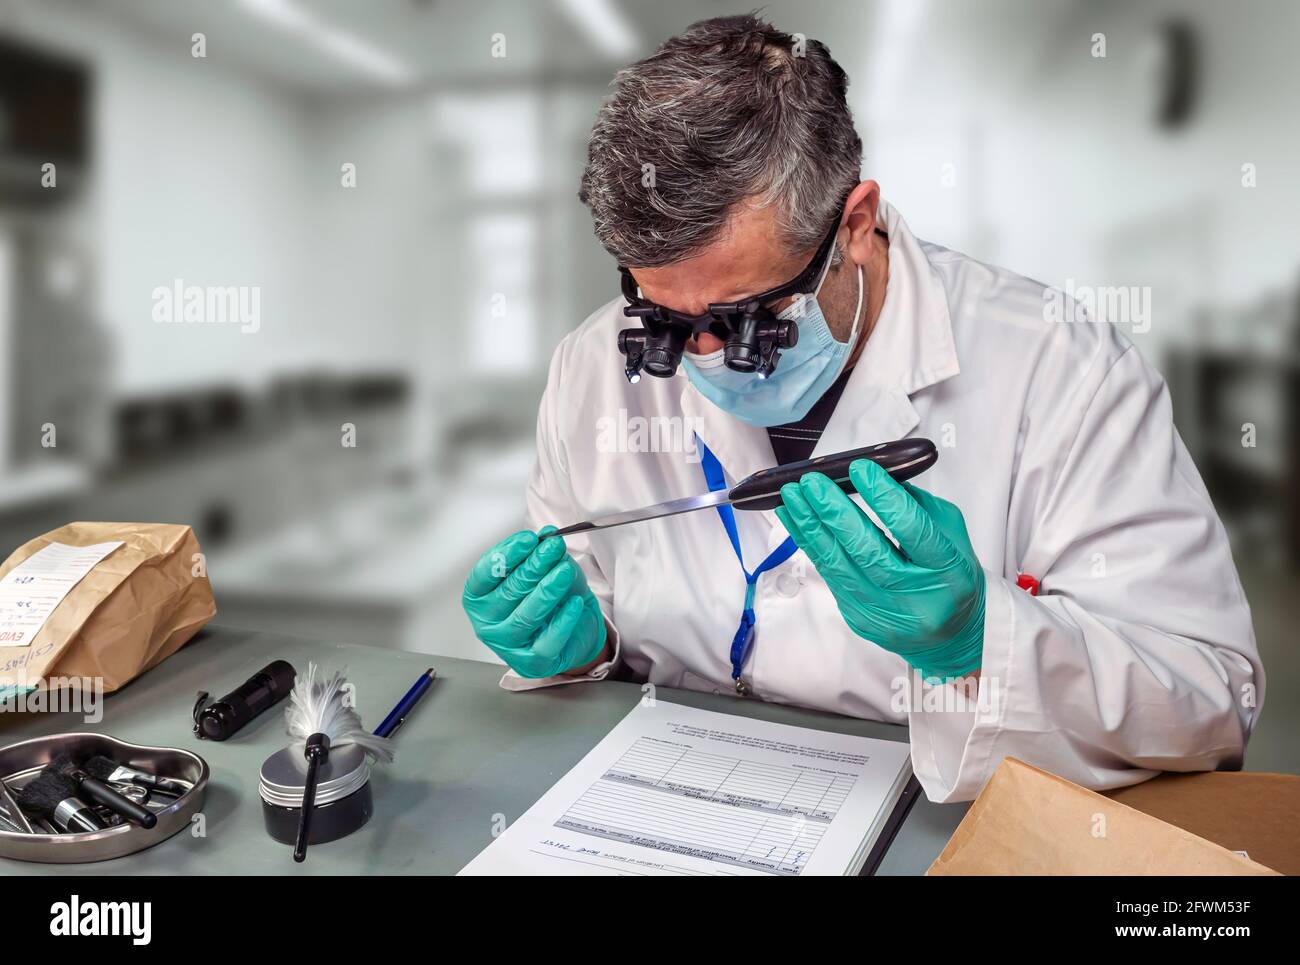 Forensic police analyse knife used in murder at crime lab with magnifying glasses, concept image Stock Photo